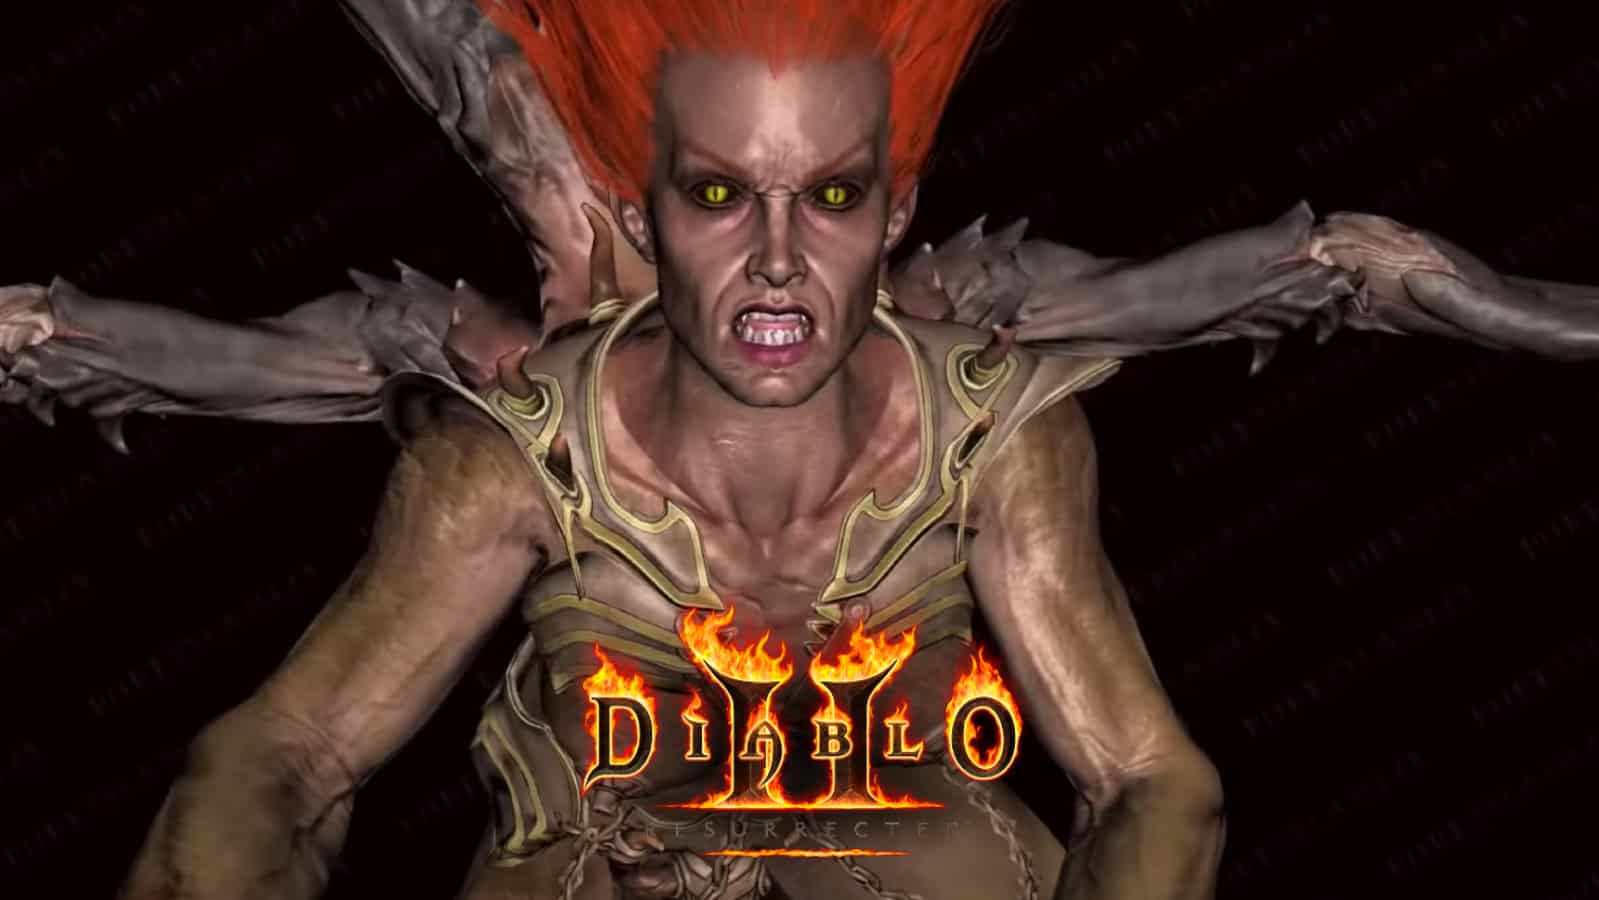 Diablo woman with spider legs and red hair looks into the camera